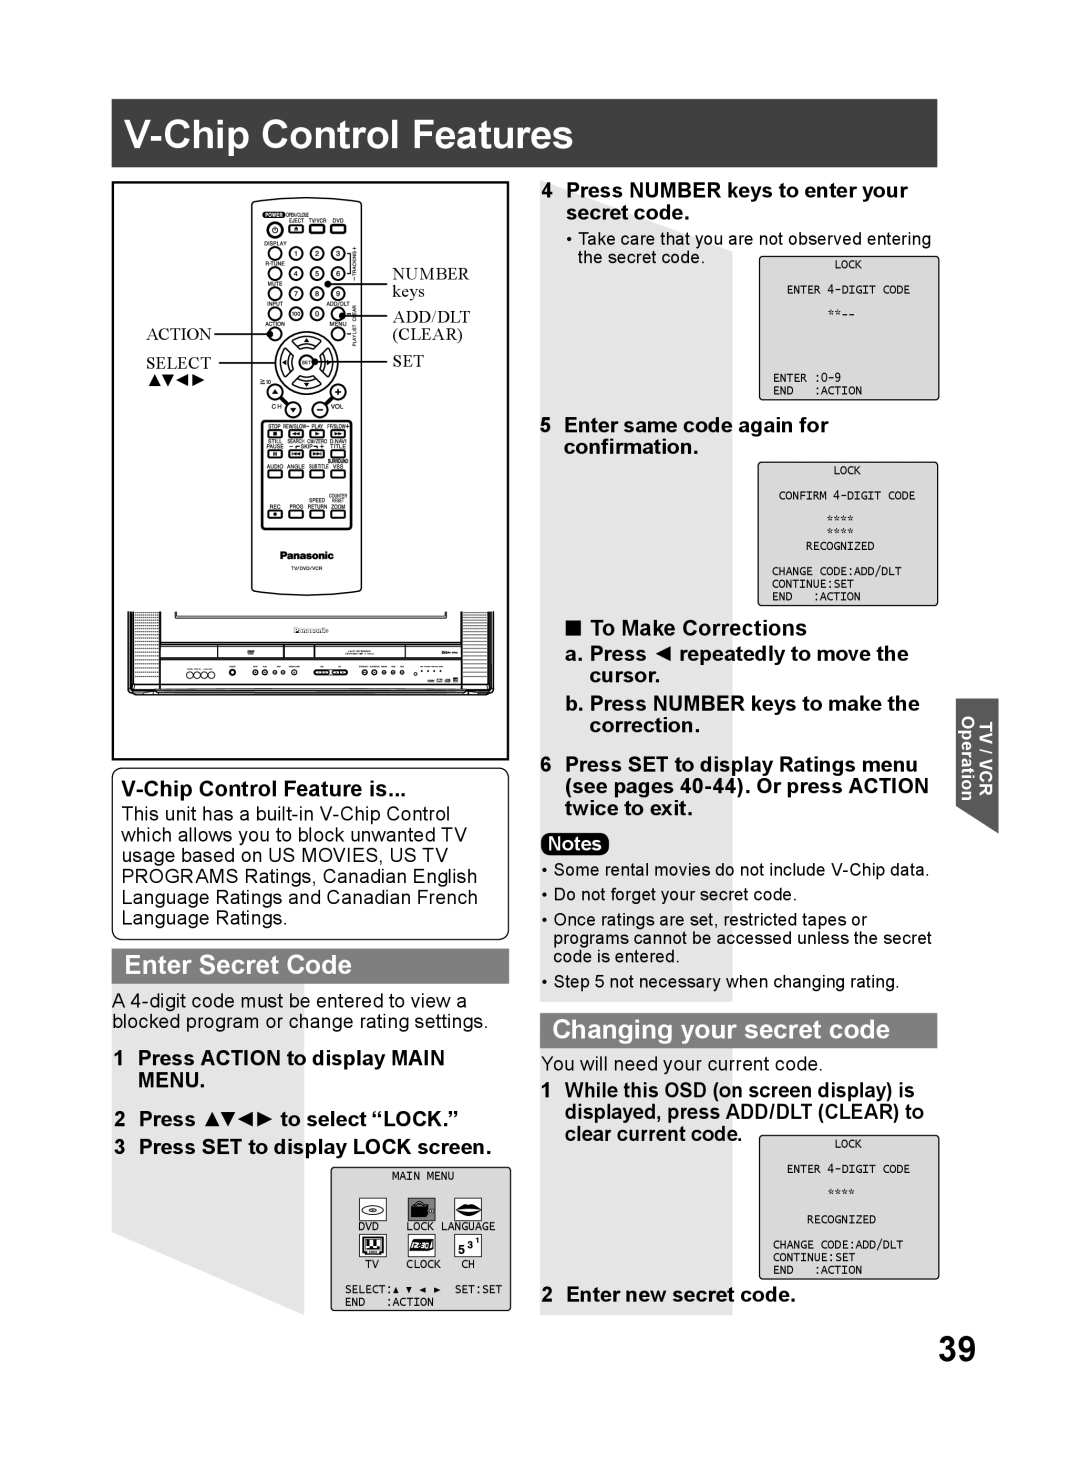 Panasonic PV DF2704 manual V-Chip Control Features, Enter Secret Code, Changing your secret code, V-Chip Control Feature is 